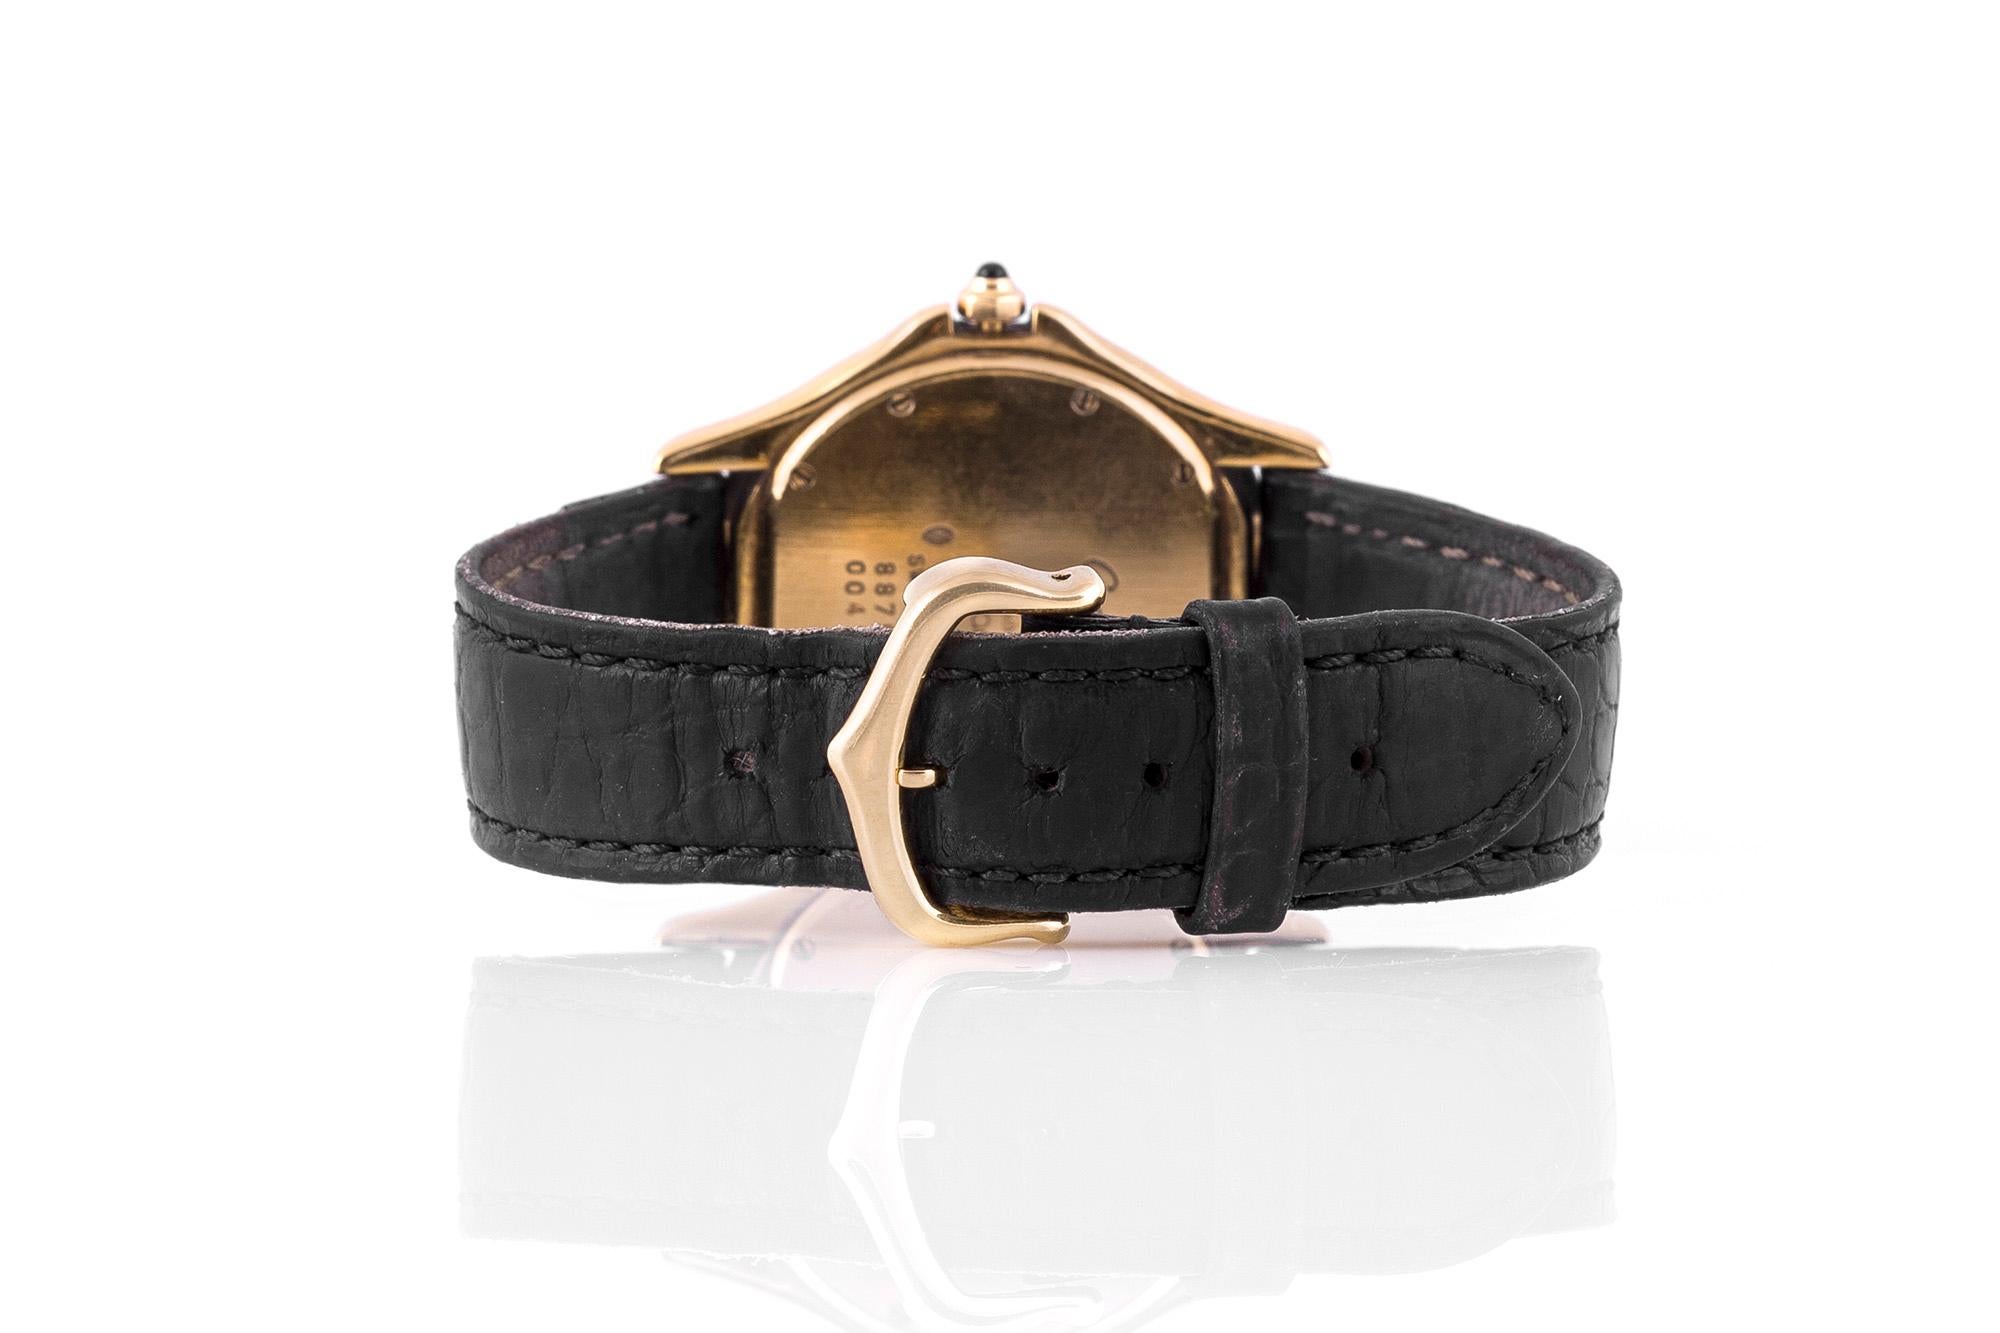 Cartier Cougar watch, finely crafted in 18k yellow gold on the original Cartier black alligator leather strap and original Cartier 18k yellow gold buckle, Quartz movement, Sapphire glass. Case diameter: 33 mm.